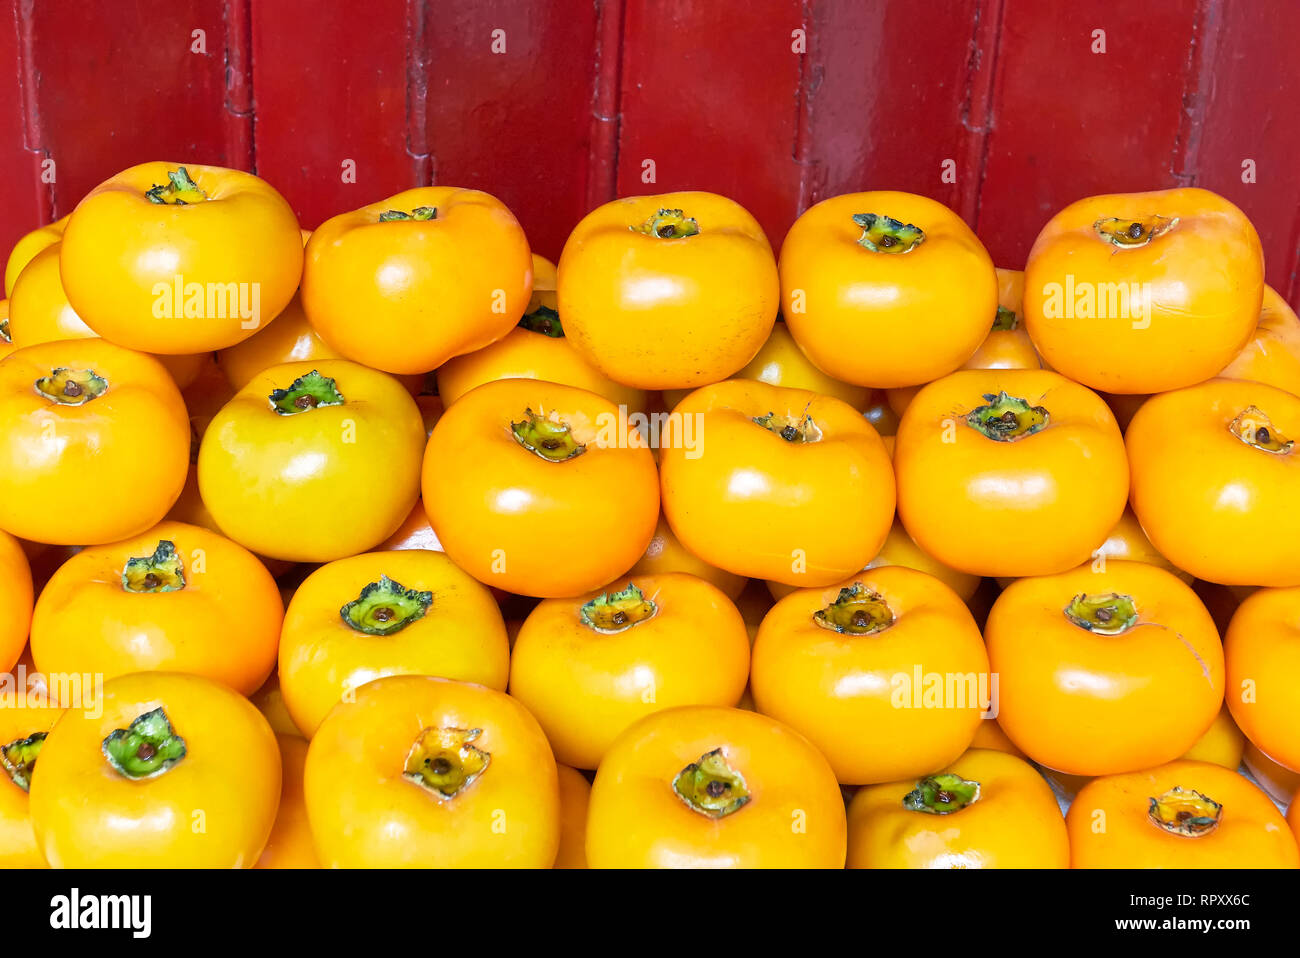 Close-up of a pile of edible orange colored persimmon fruits in front of a red colored background, for sale in Chinatown Manila, Philippines Stock Photo